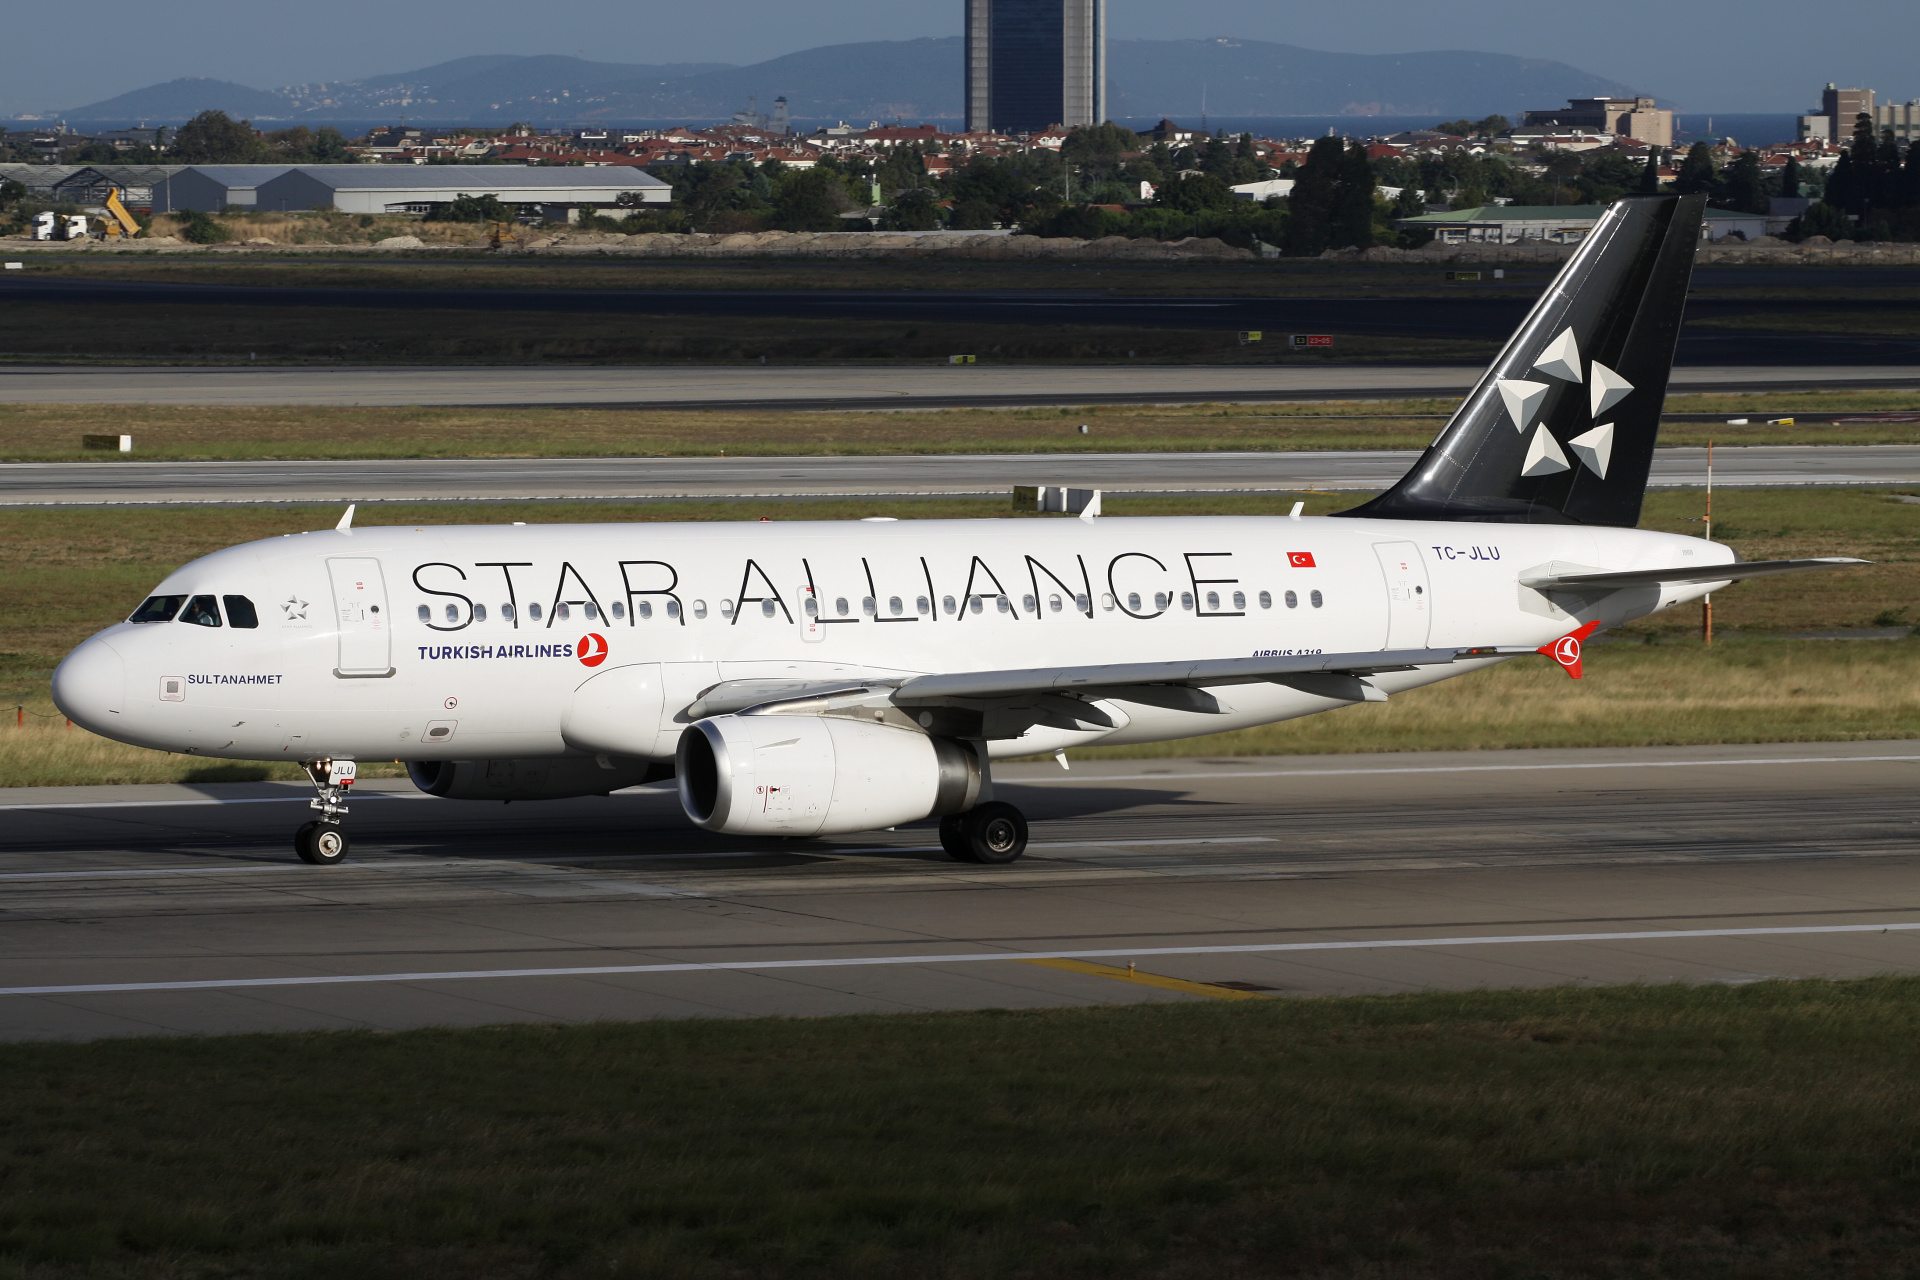 TC-JLU, THY Turkish Airlines (Star Alliance livery) (Aircraft » Istanbul Atatürk Airport » Airbus A319-100)